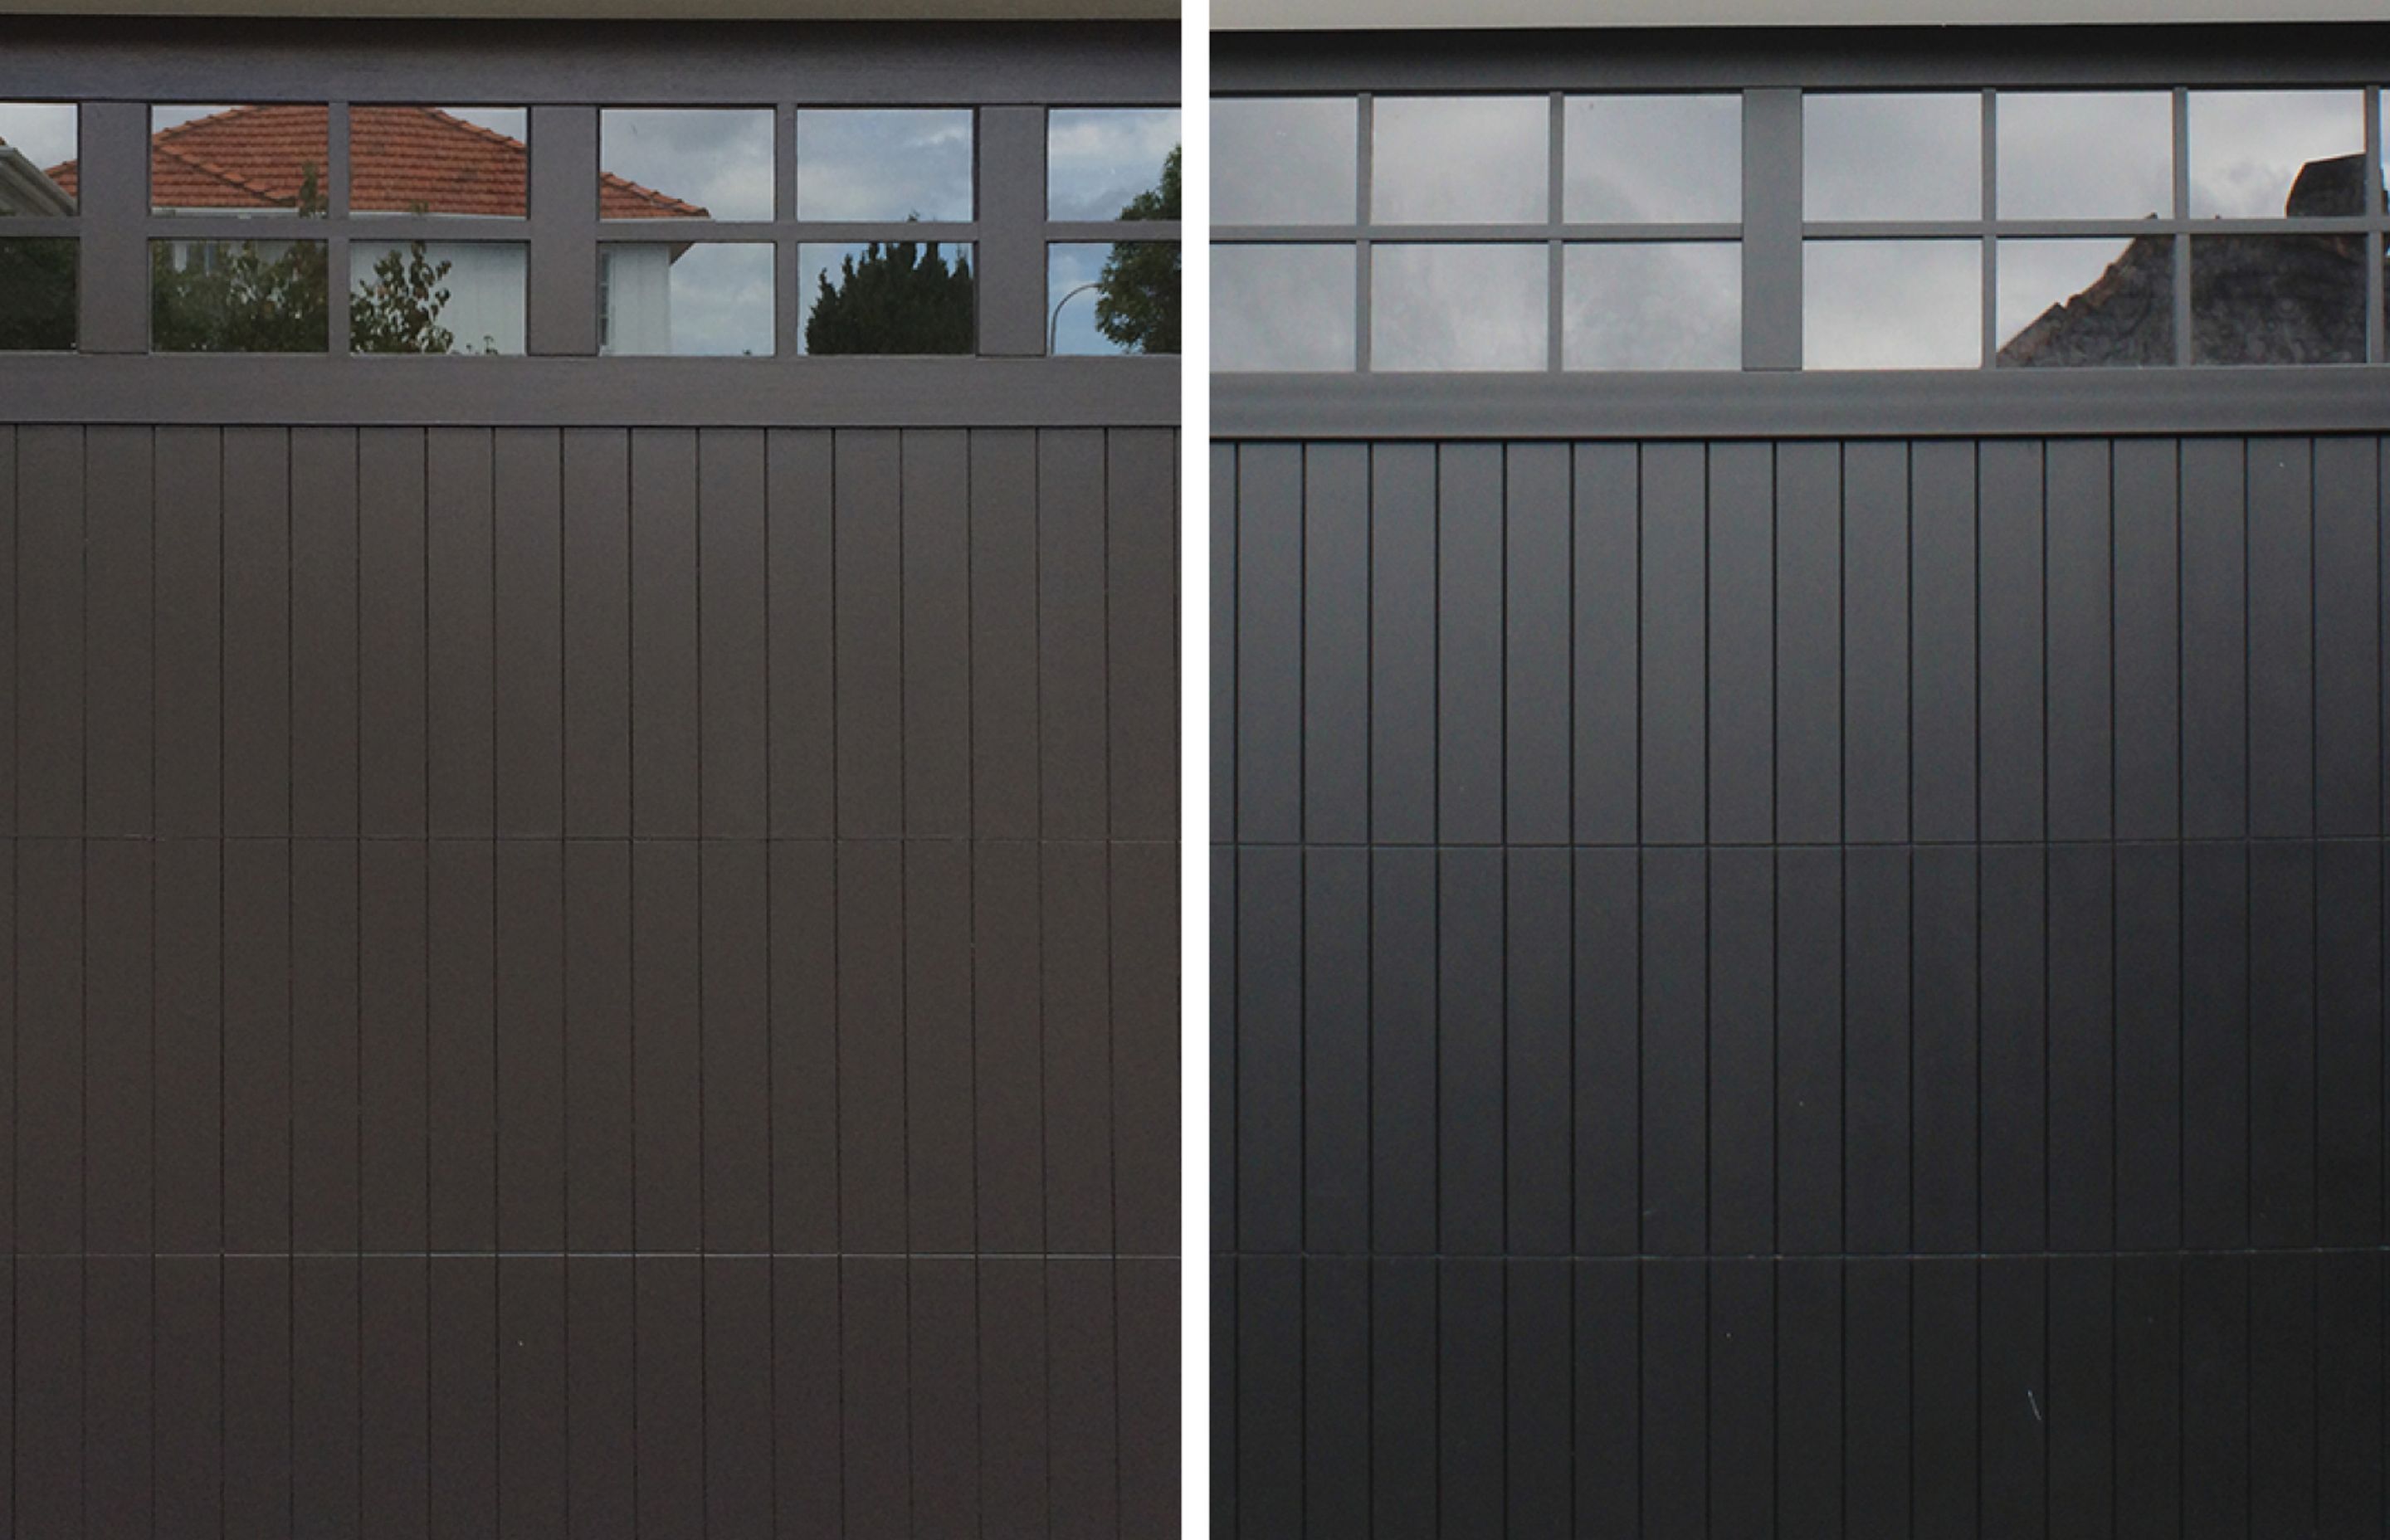 Before and after: on the left is the original natural cedar TGV garage door, on the right is the low-maintenance aluminium TGV garage door from Prestige Doors &amp; Gates.